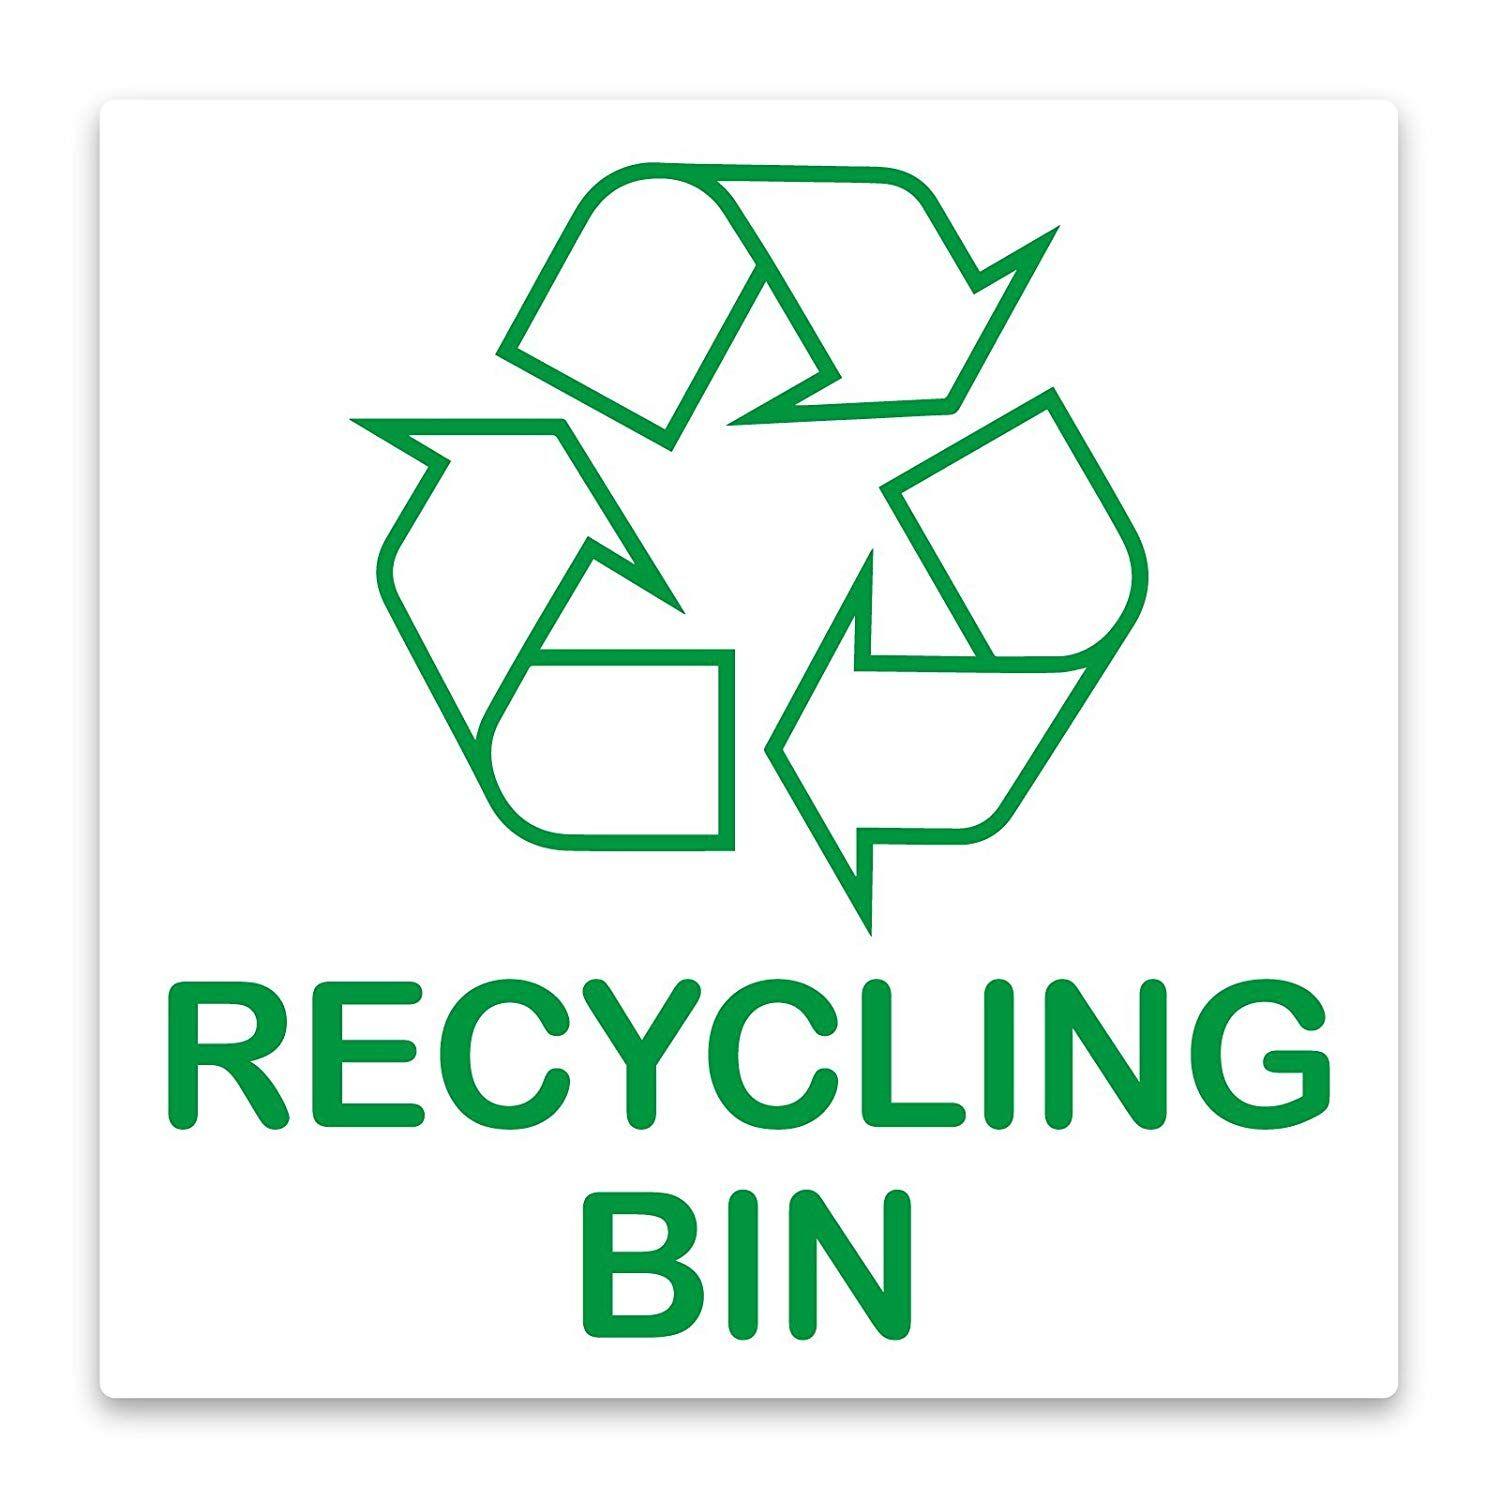 Recycling Logo - Recycling Bin Self-adhesive Sticker - Recycle Logo Sign ...